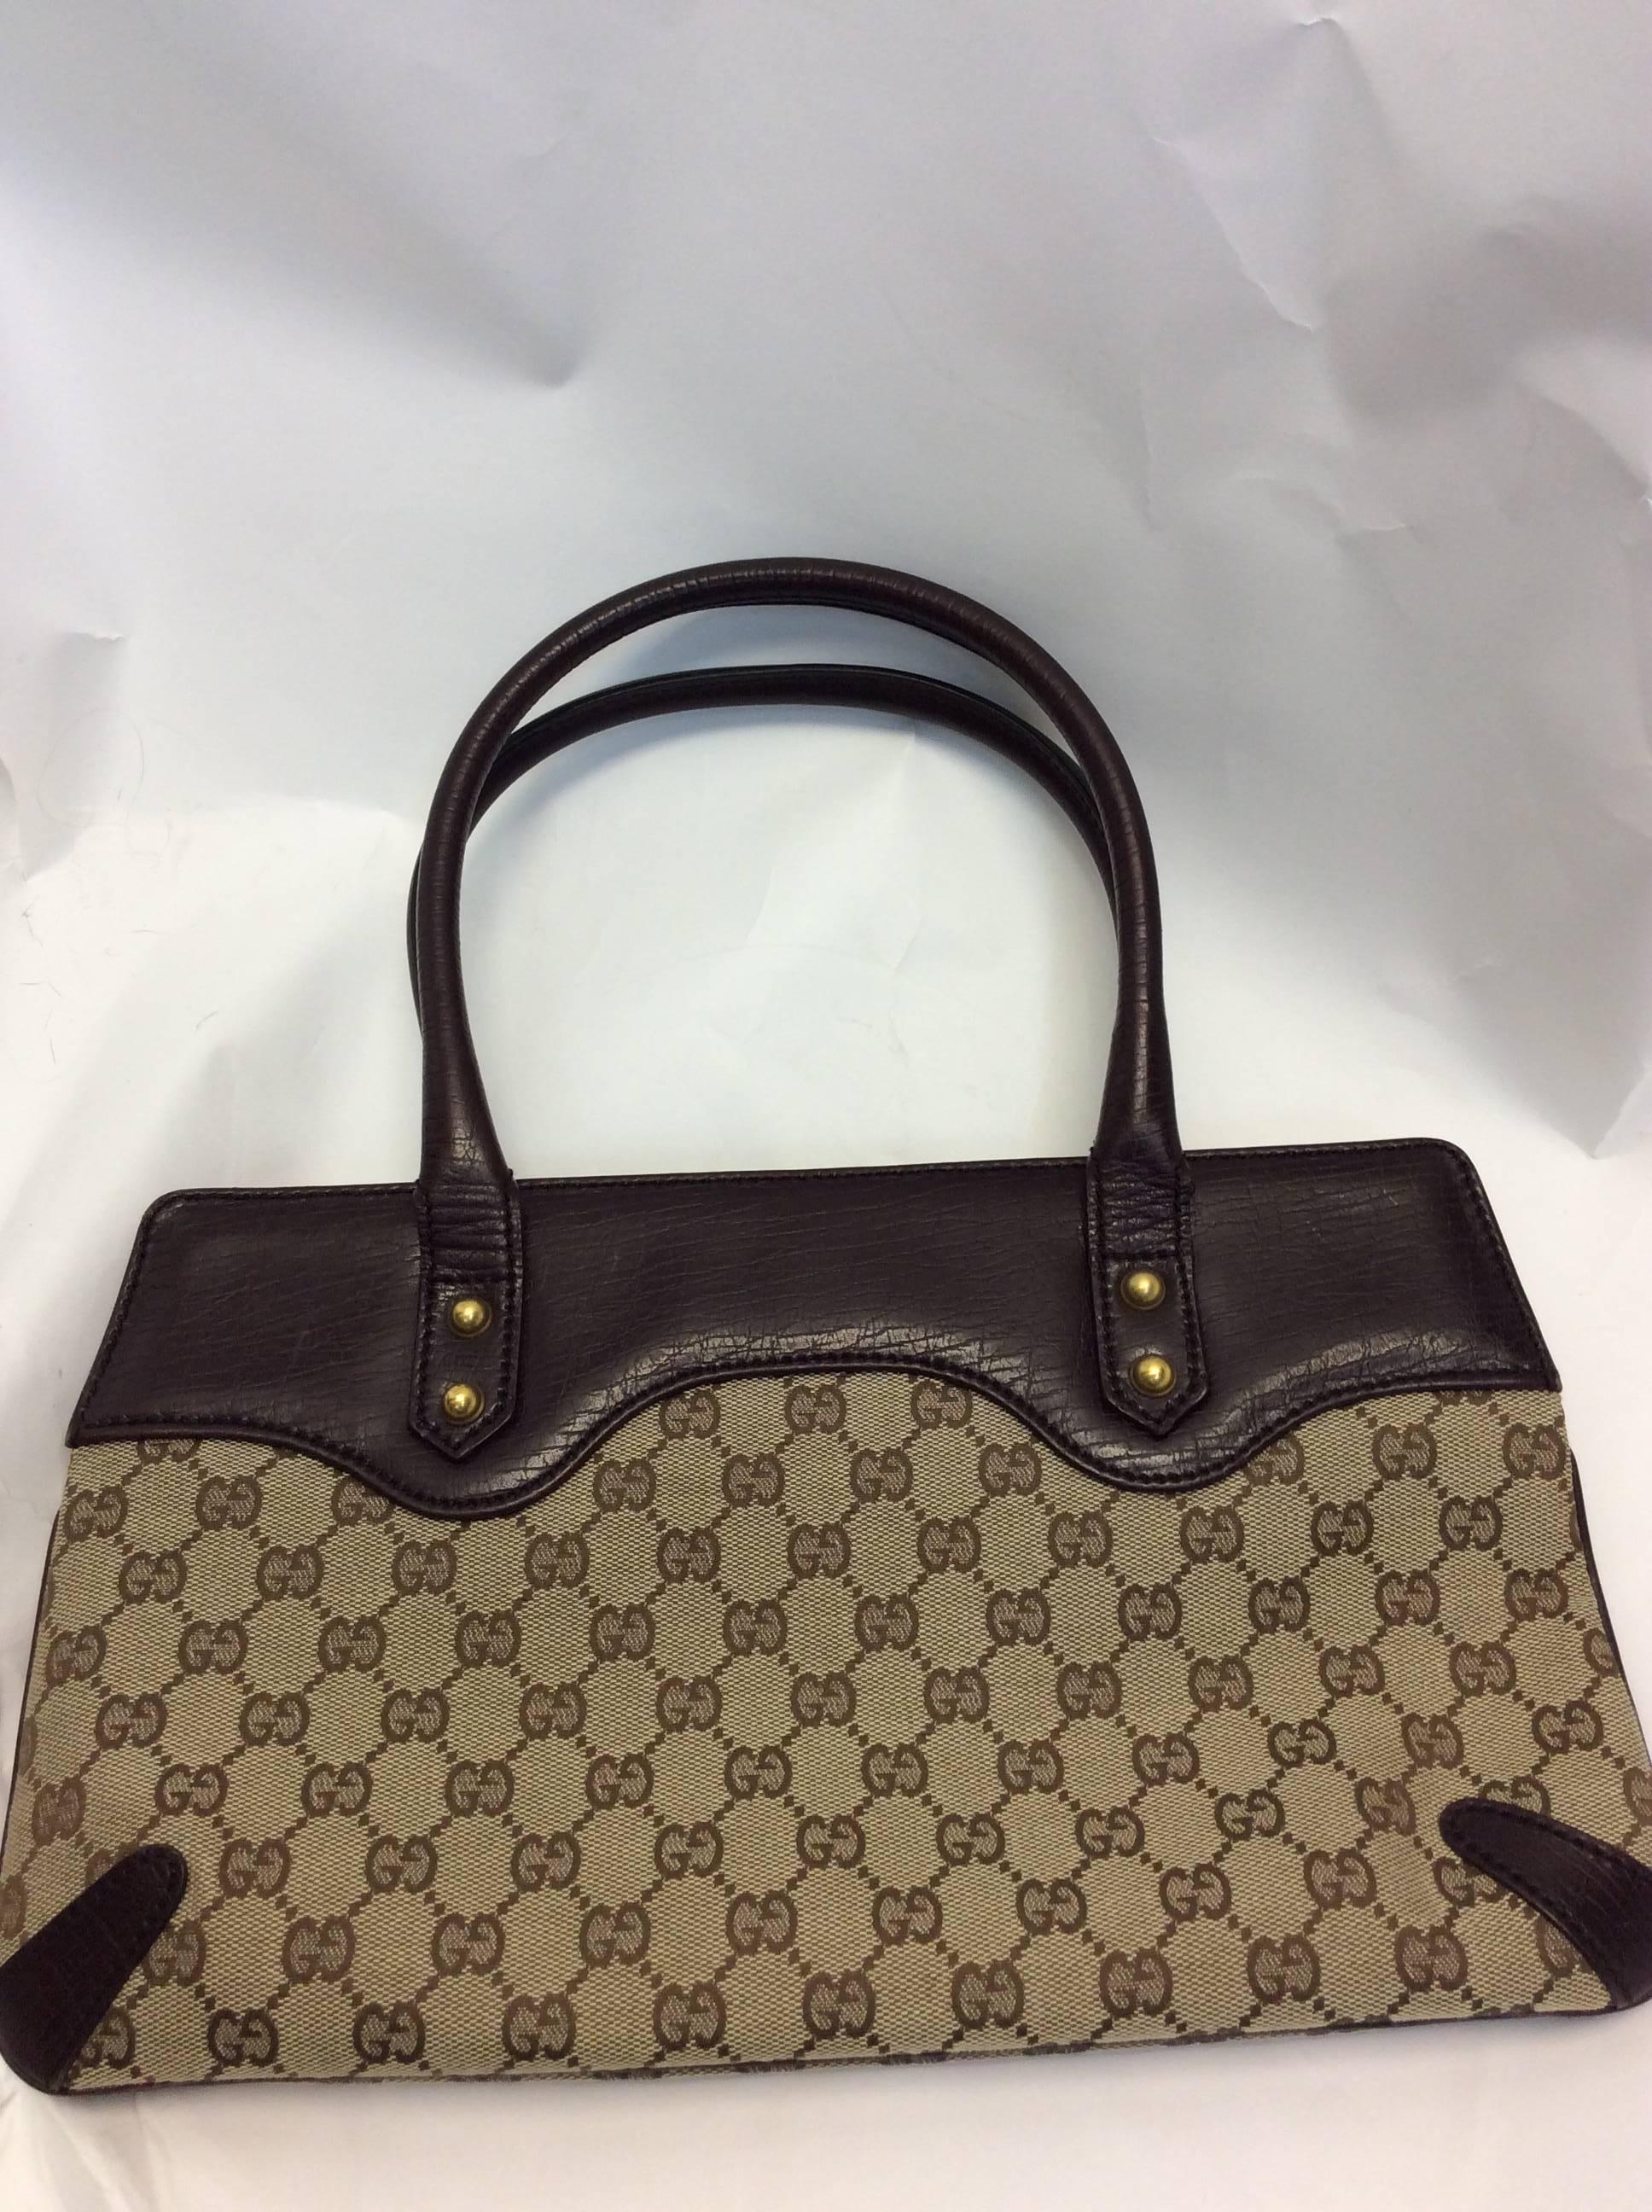 Gucci Logo Leather Horsebit Bag In Excellent Condition For Sale In Narberth, PA